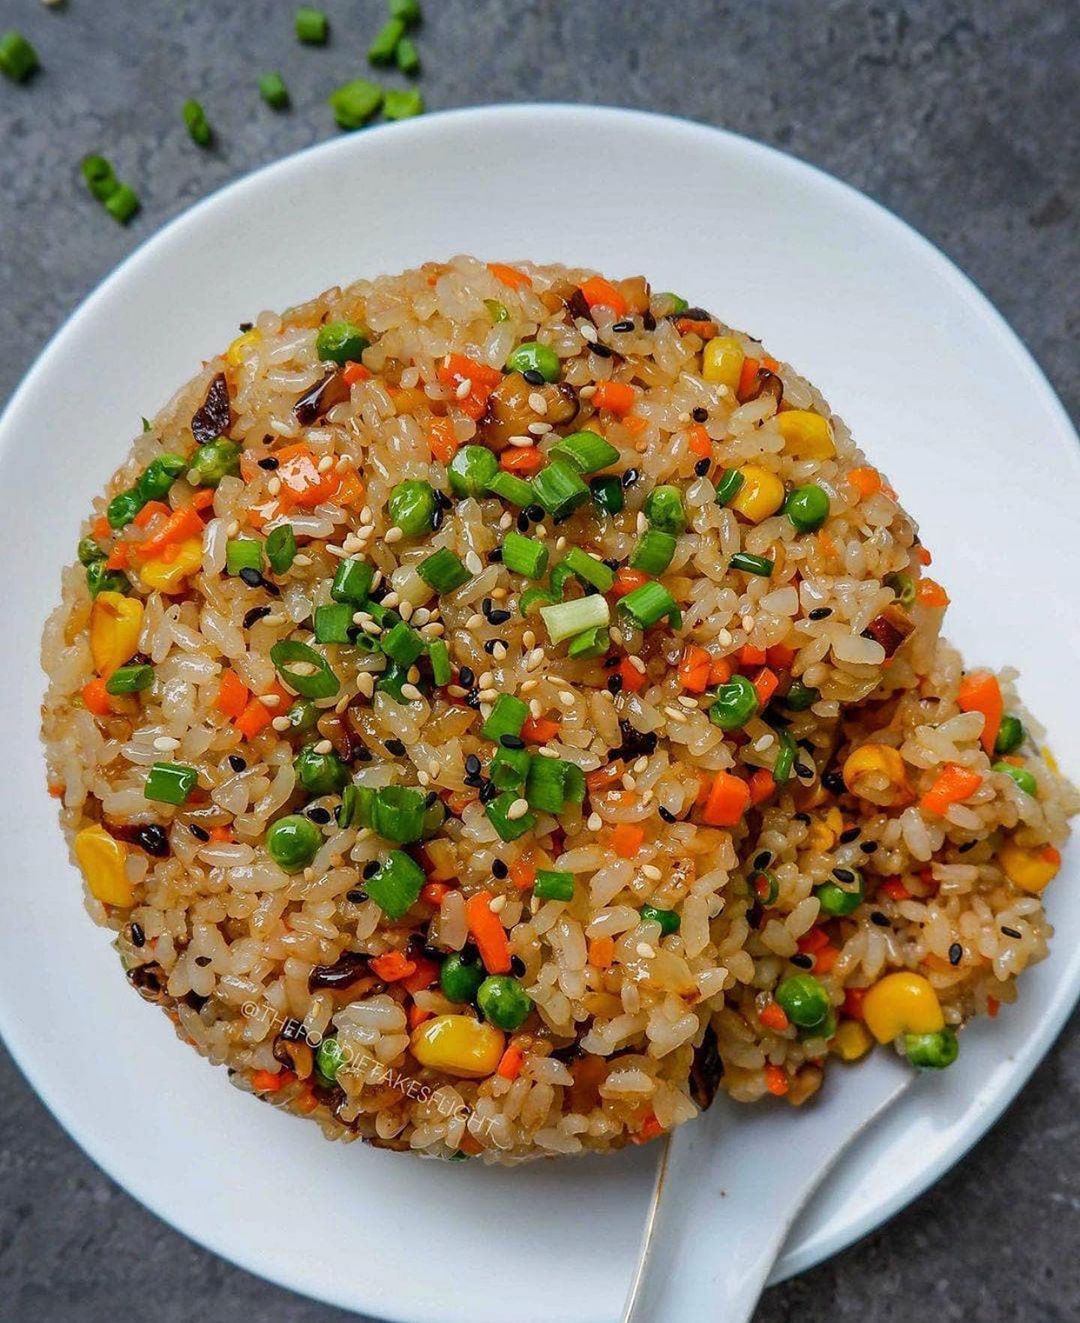 Japanese Chahan or Fried Rice